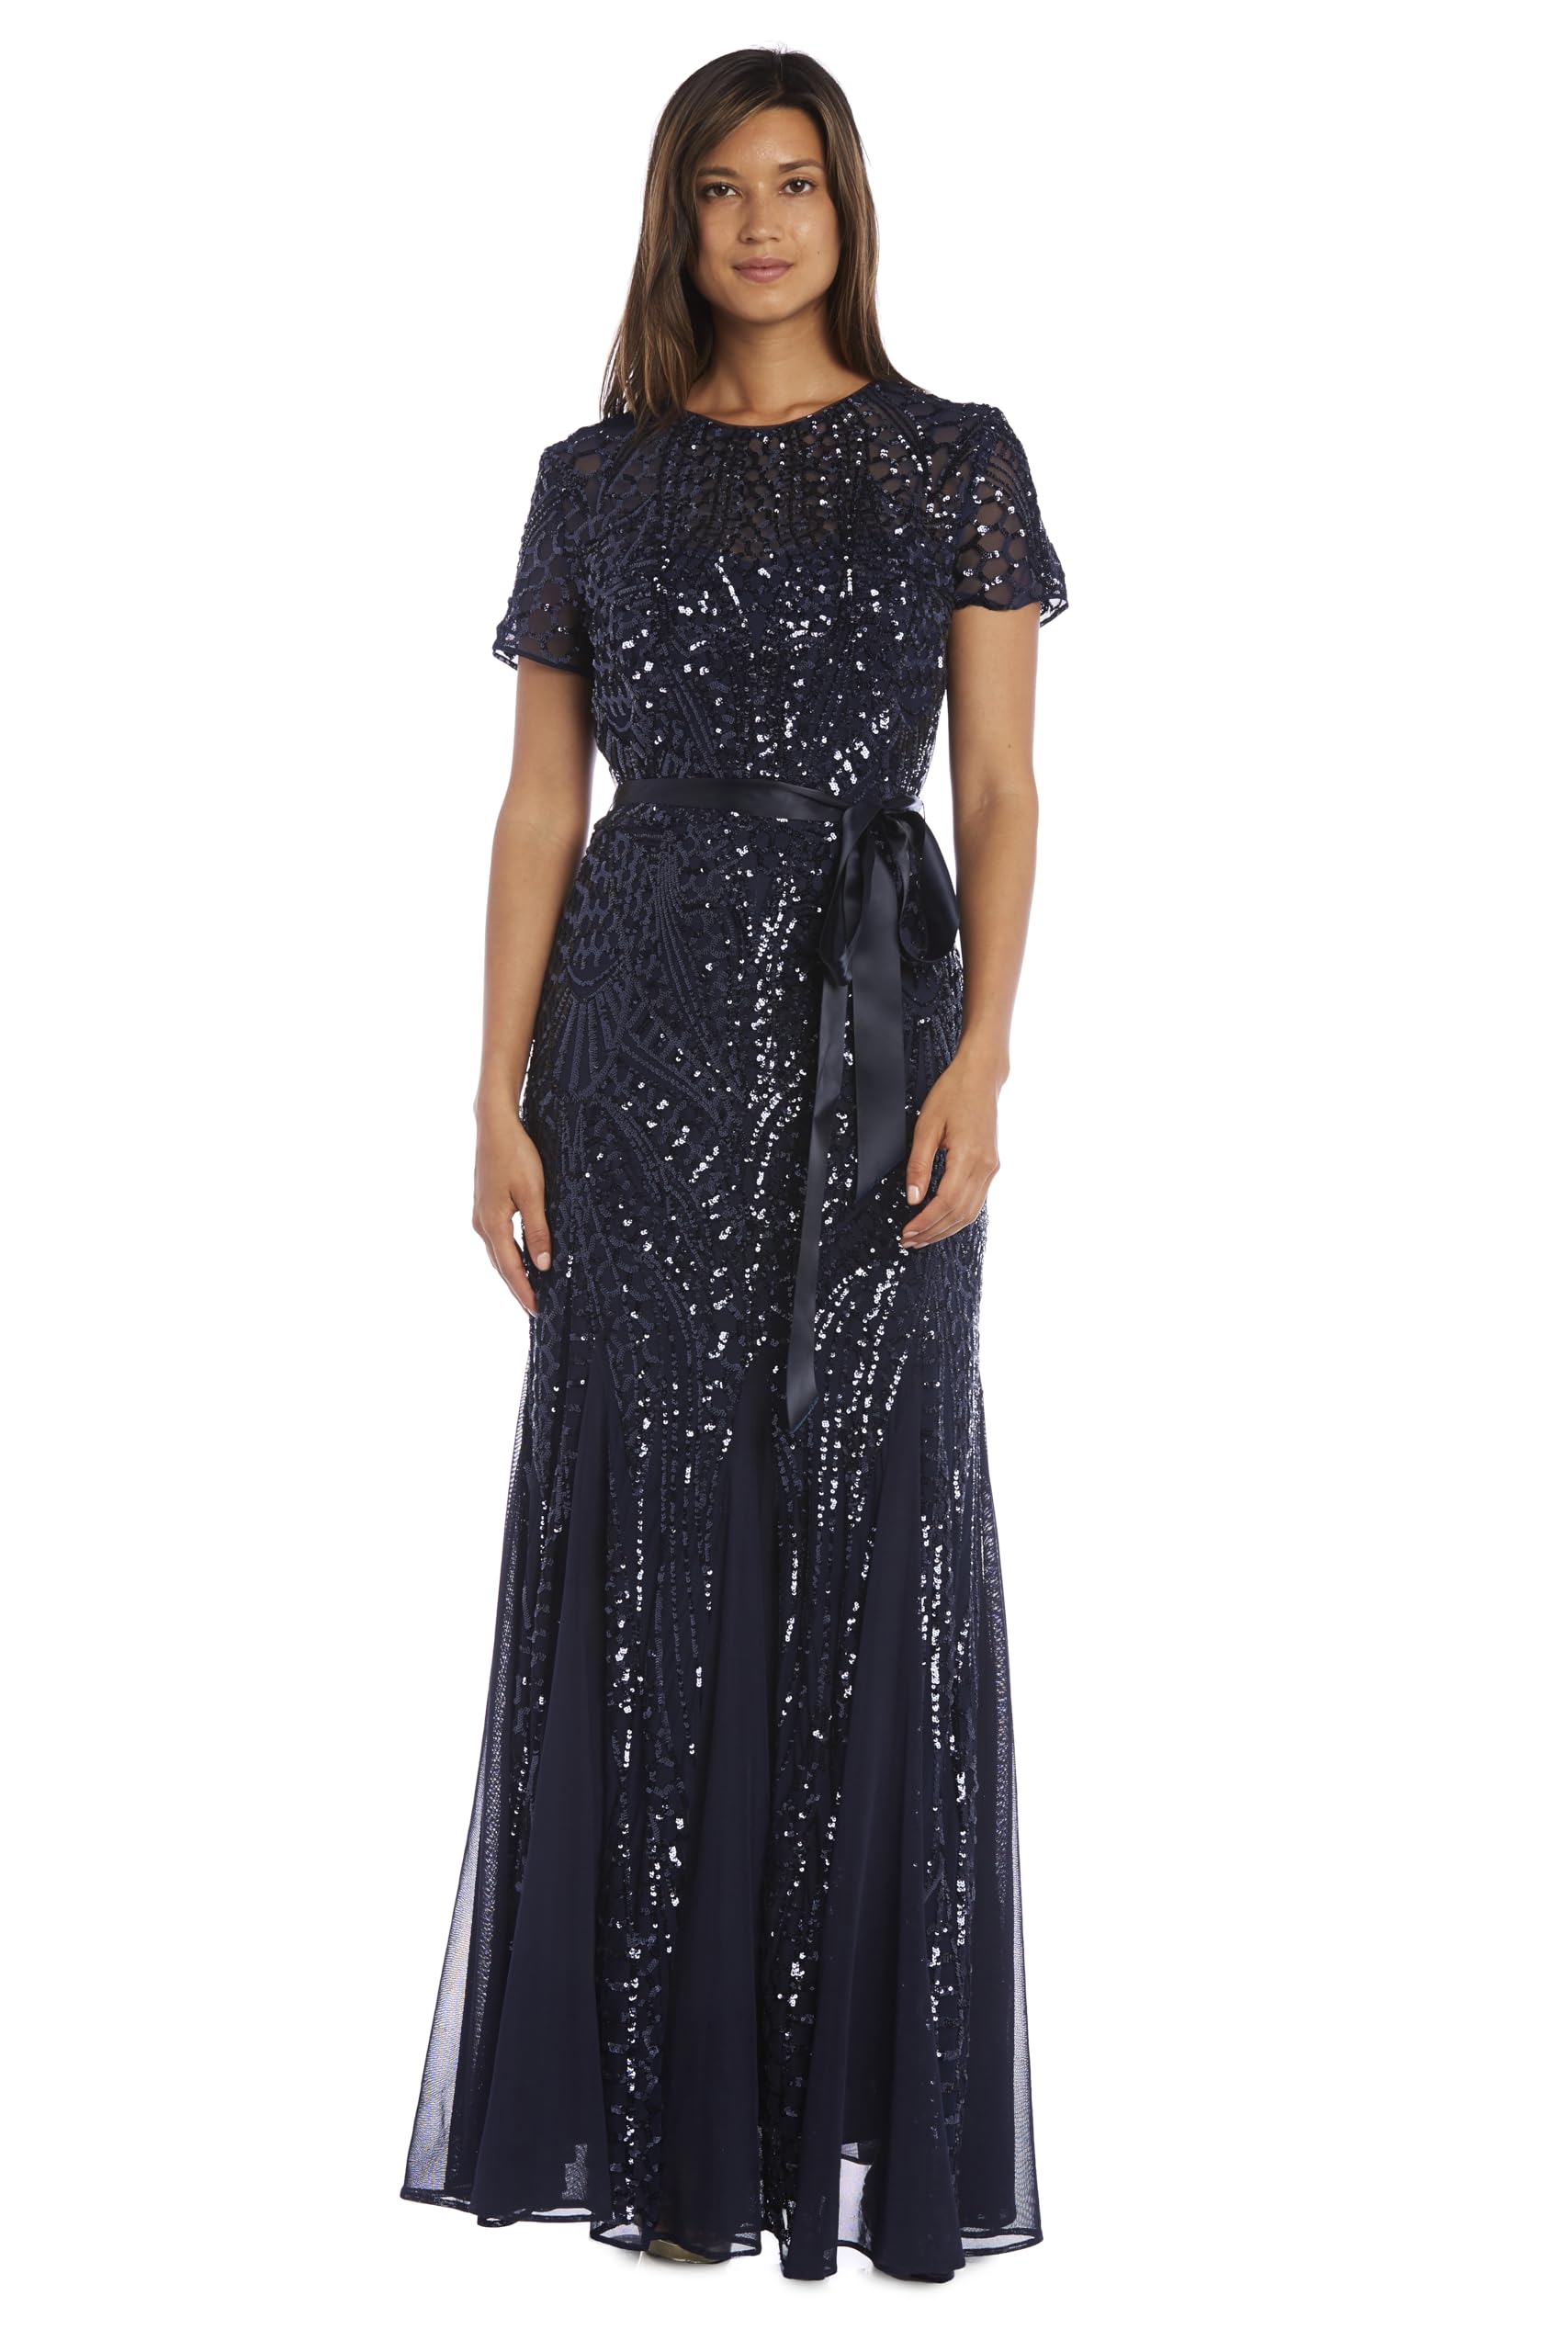 R&M Richards Women's Sequined Embellished Full Length Maxi Evening Dress Gown